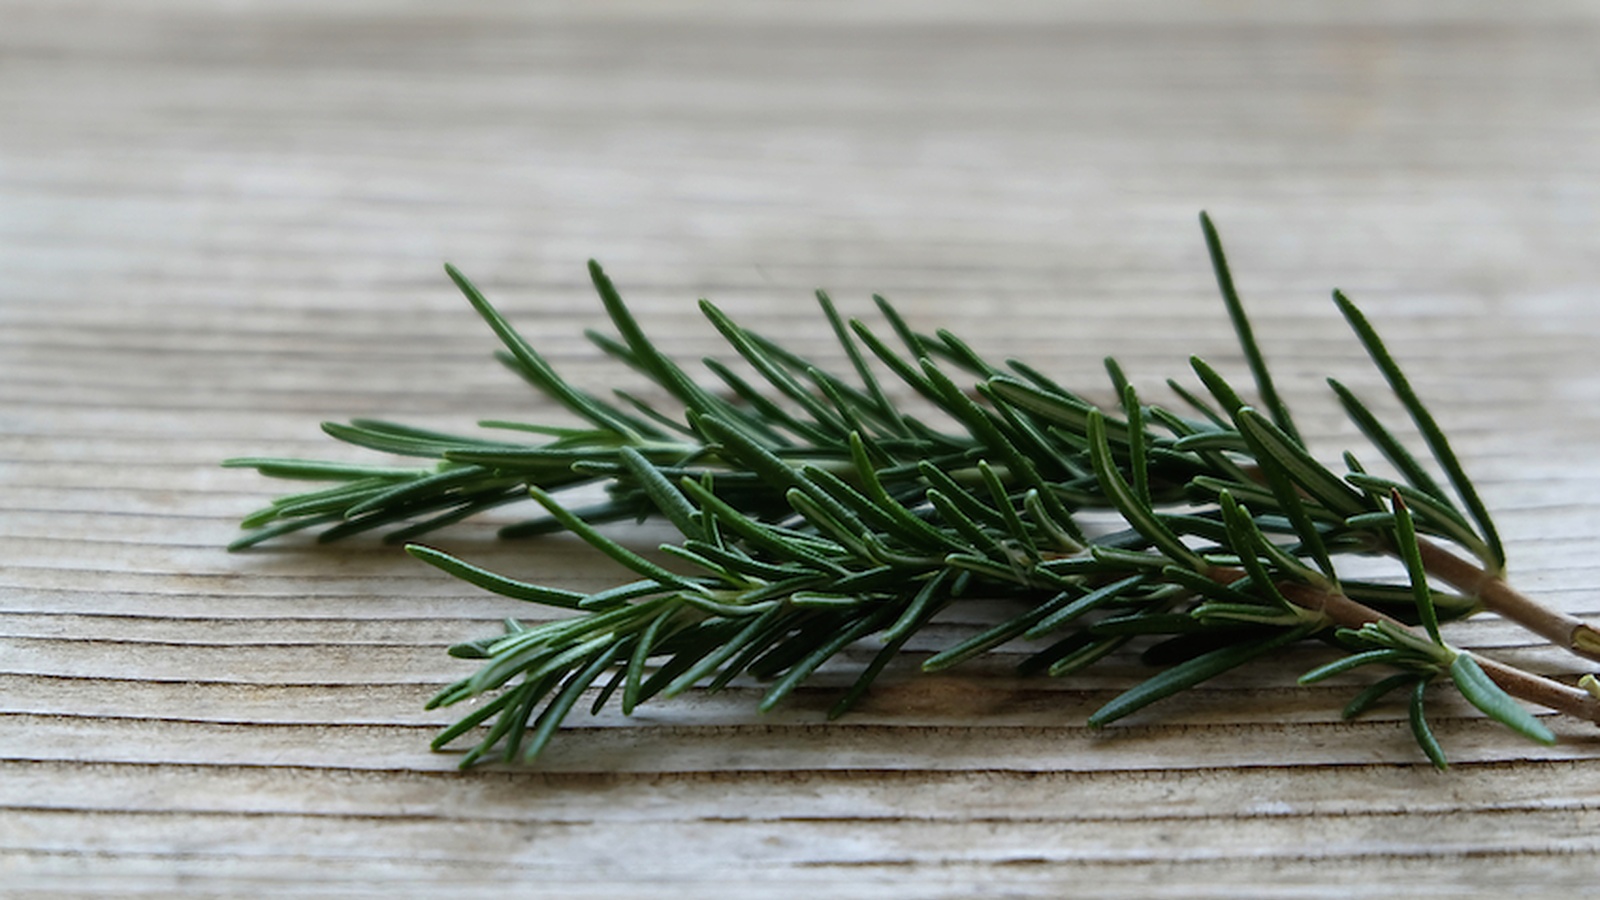 11 Herbs That Will Help Make Your Memory, Focus And Brain Work Better Than Ever